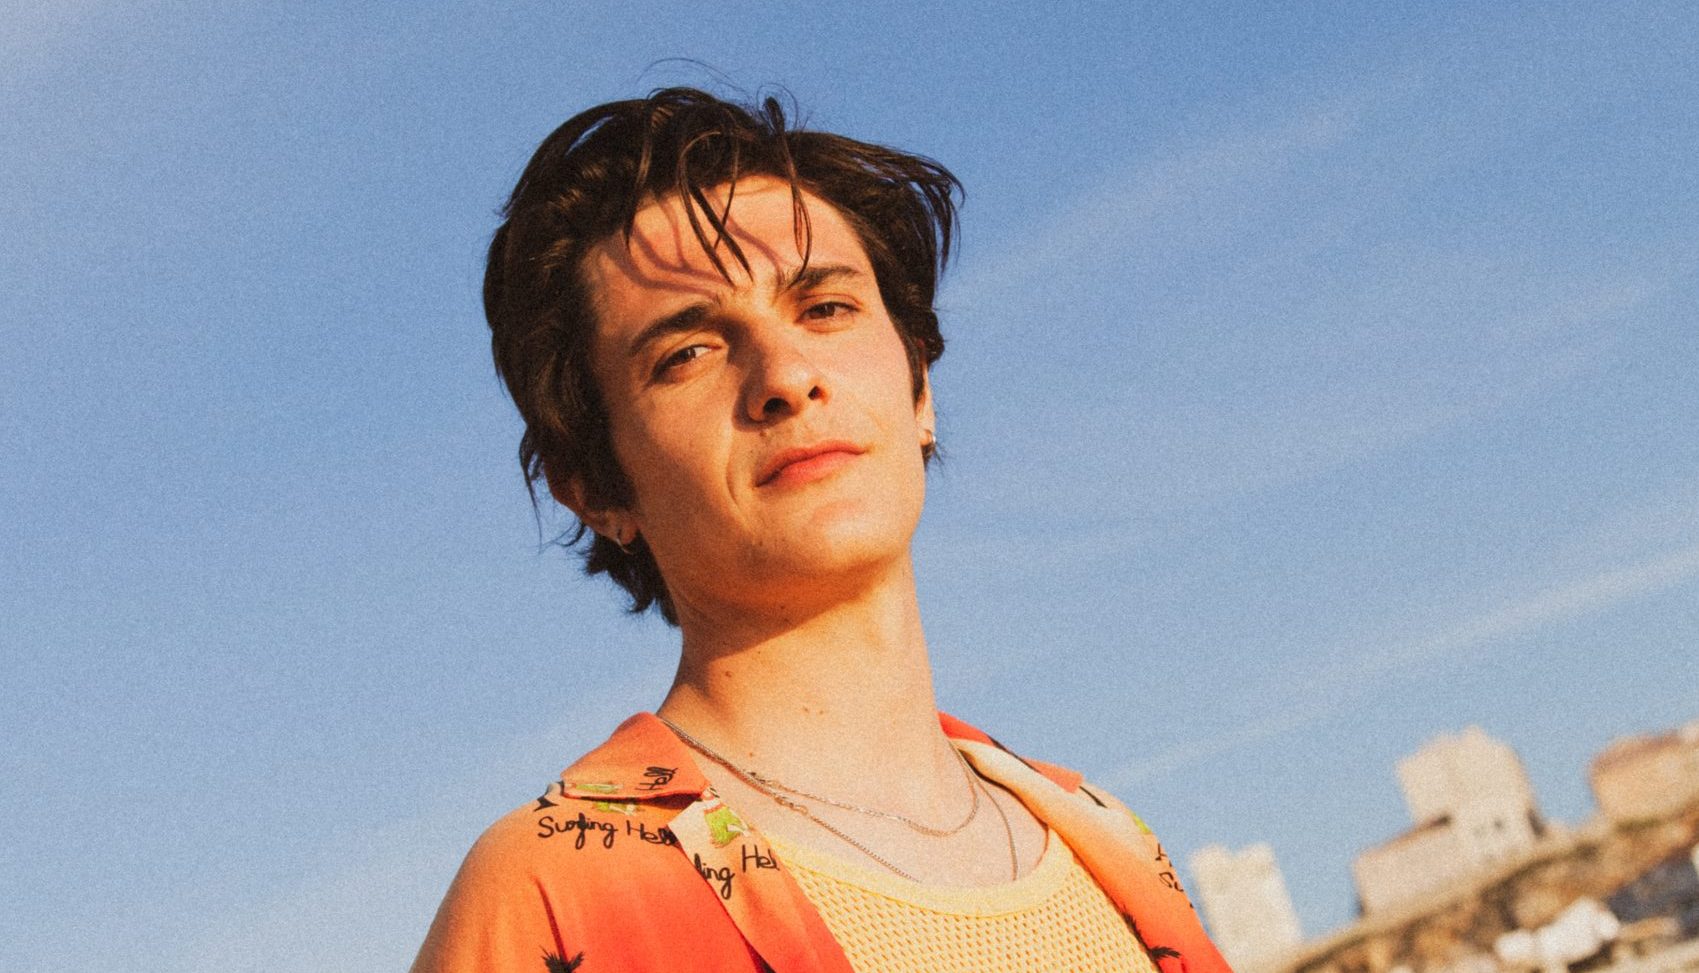 https://celebmix.com/wp-content/uploads/2021/05/kungs-gets-us-pumped-for-summer-with-new-single-never-going-home-01-scaled-e1621619694320.jpg